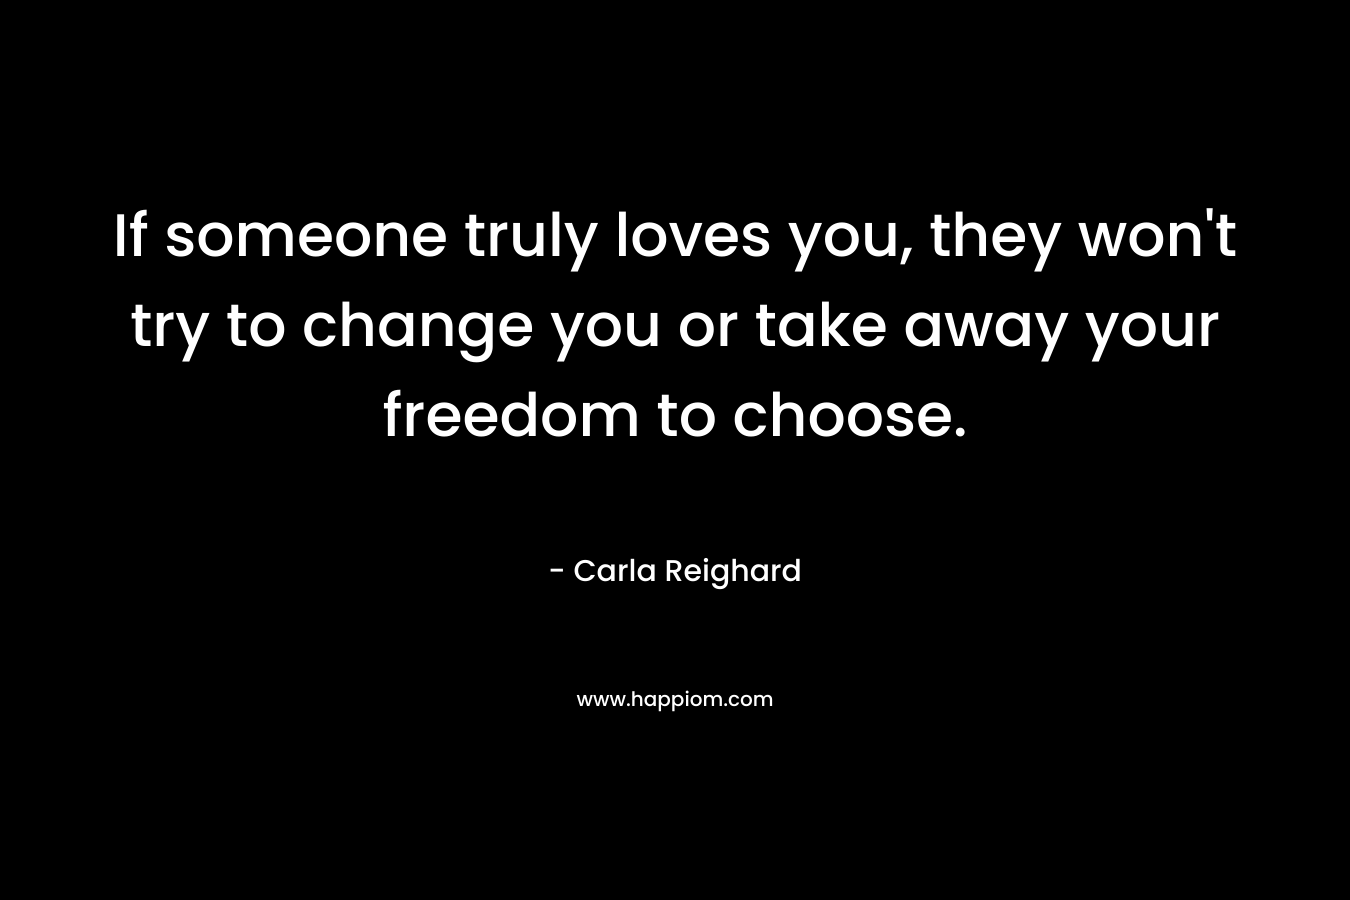 If someone truly loves you, they won’t try to change you or take away your freedom to choose. – Carla Reighard